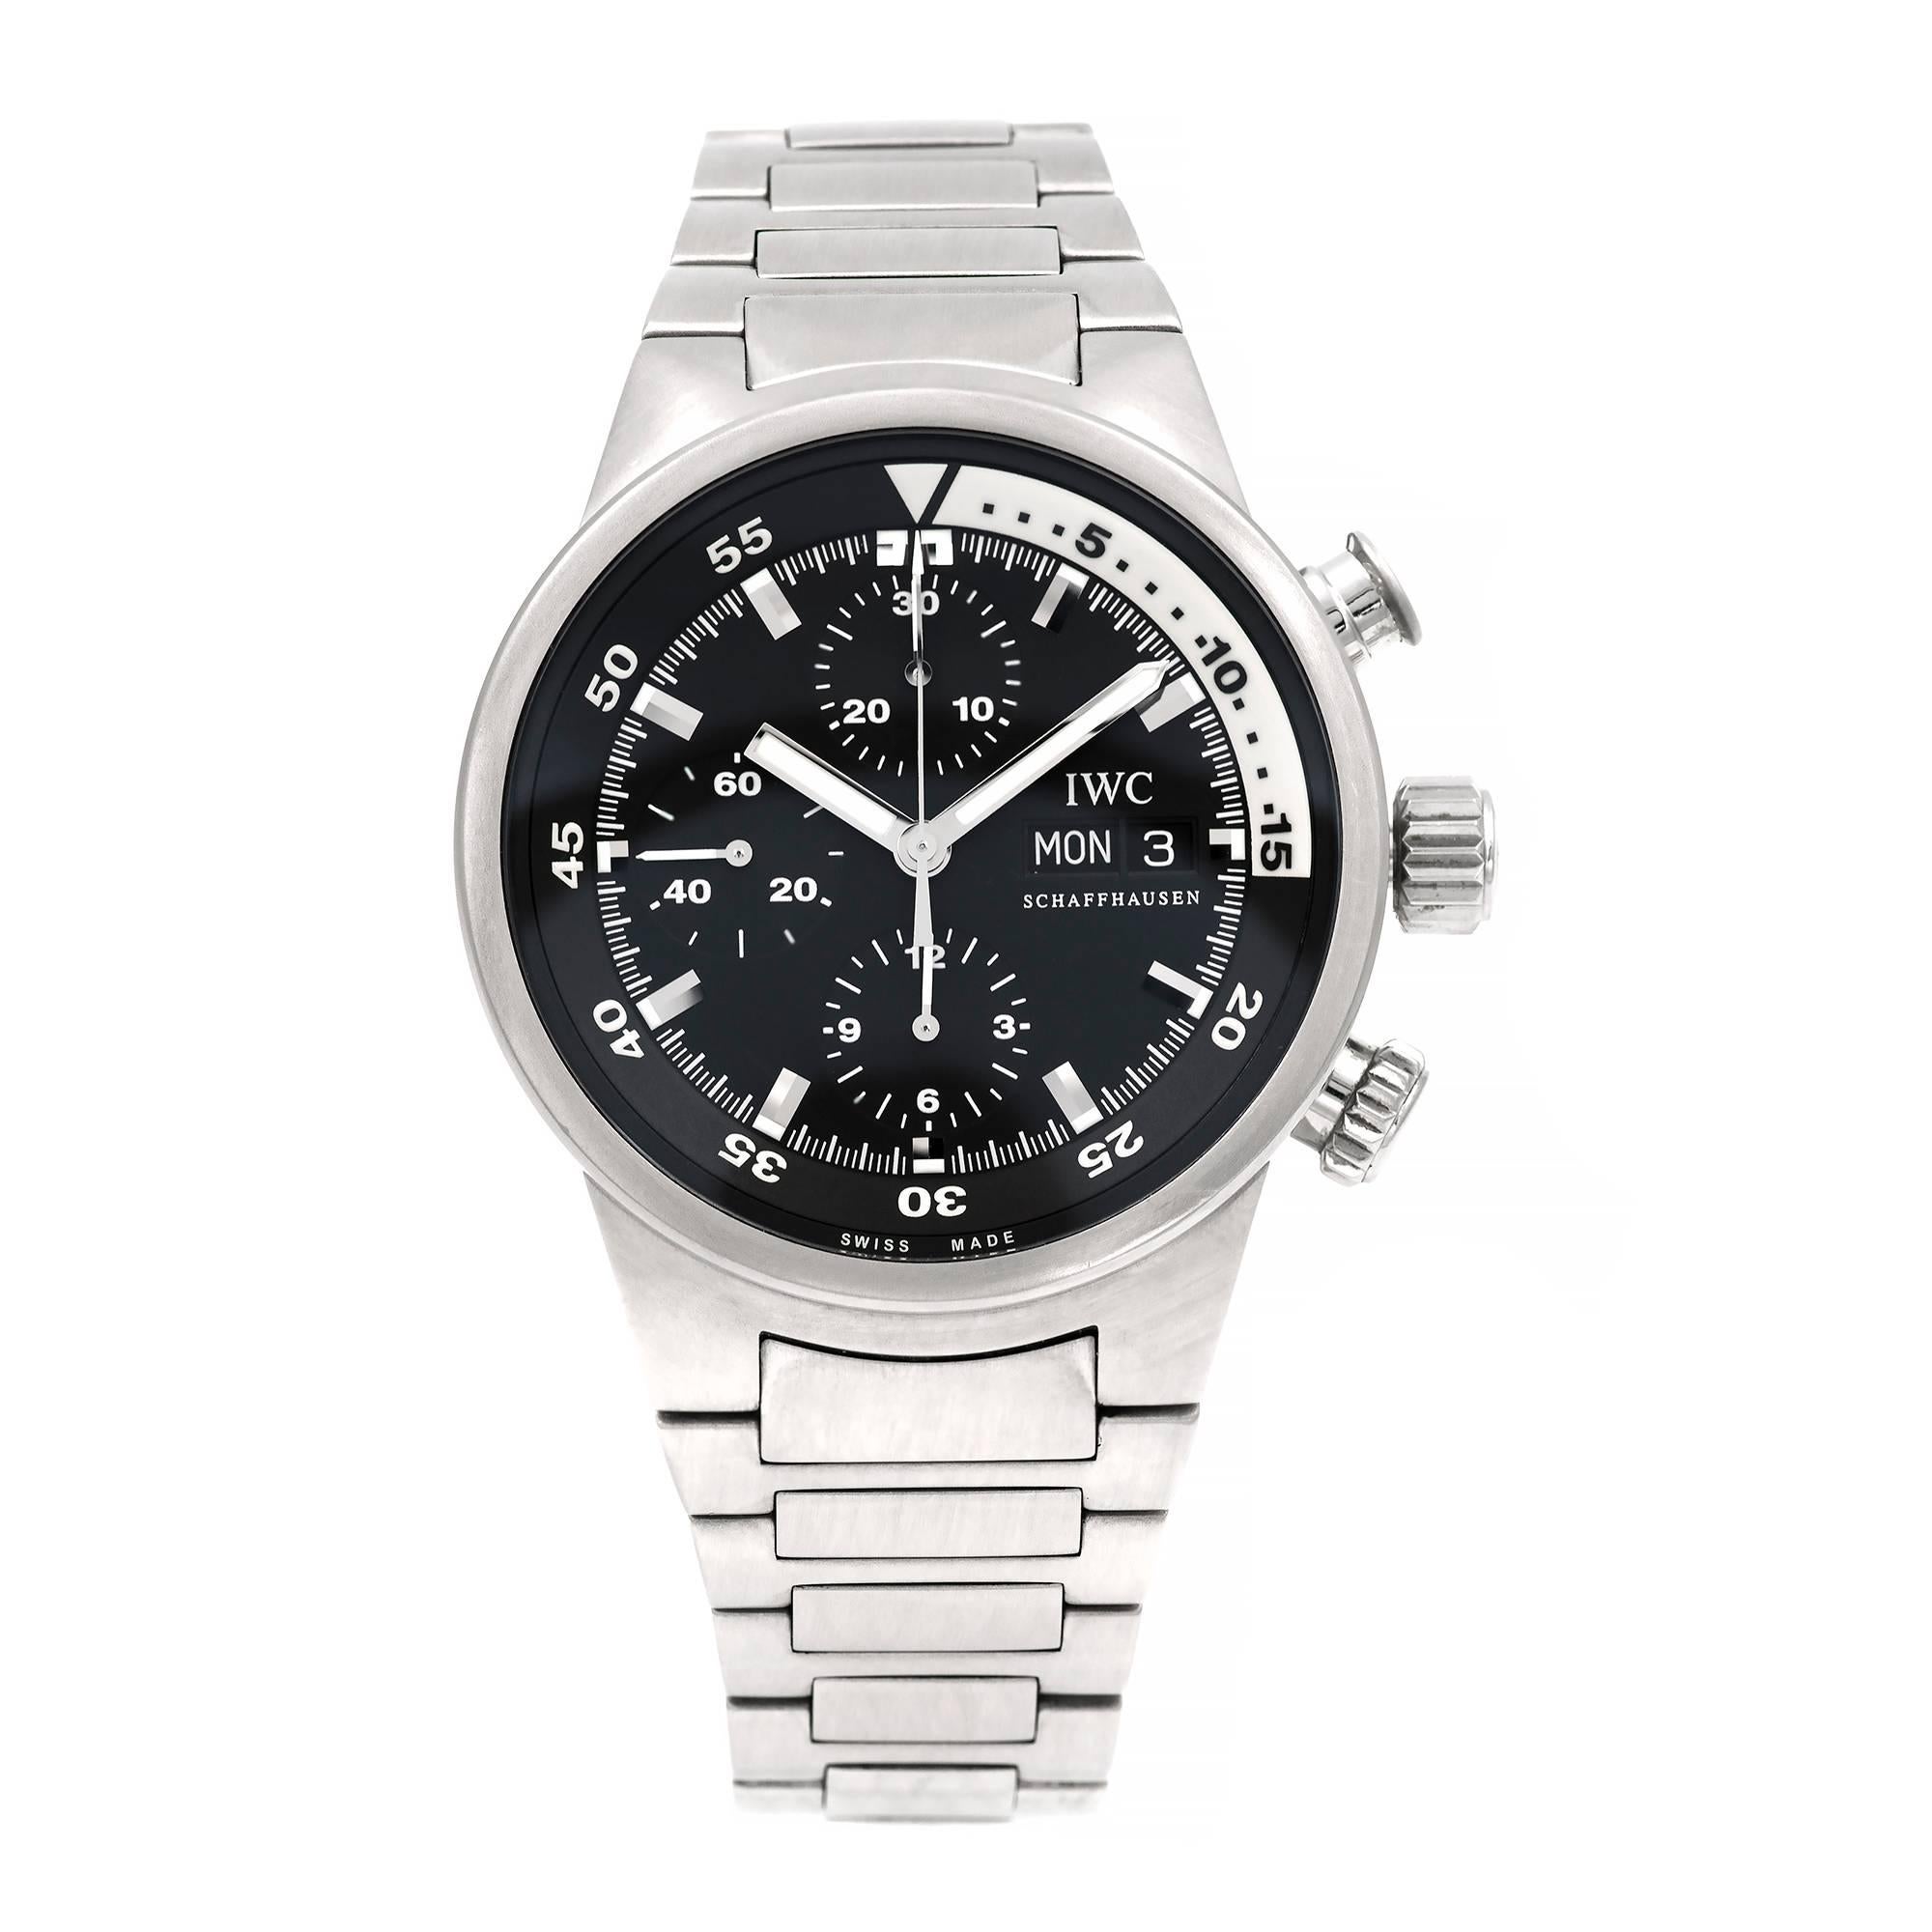 IWC International Watch Company stainless steel Aquatimer Automatic Chronograph wrist watch. All original, with full size steel band.

Stainless Steel
179.3 grams
Length: 8 3/8 inches – can be shortened
Length: 50mm
Width: 42mm
Band width at case: